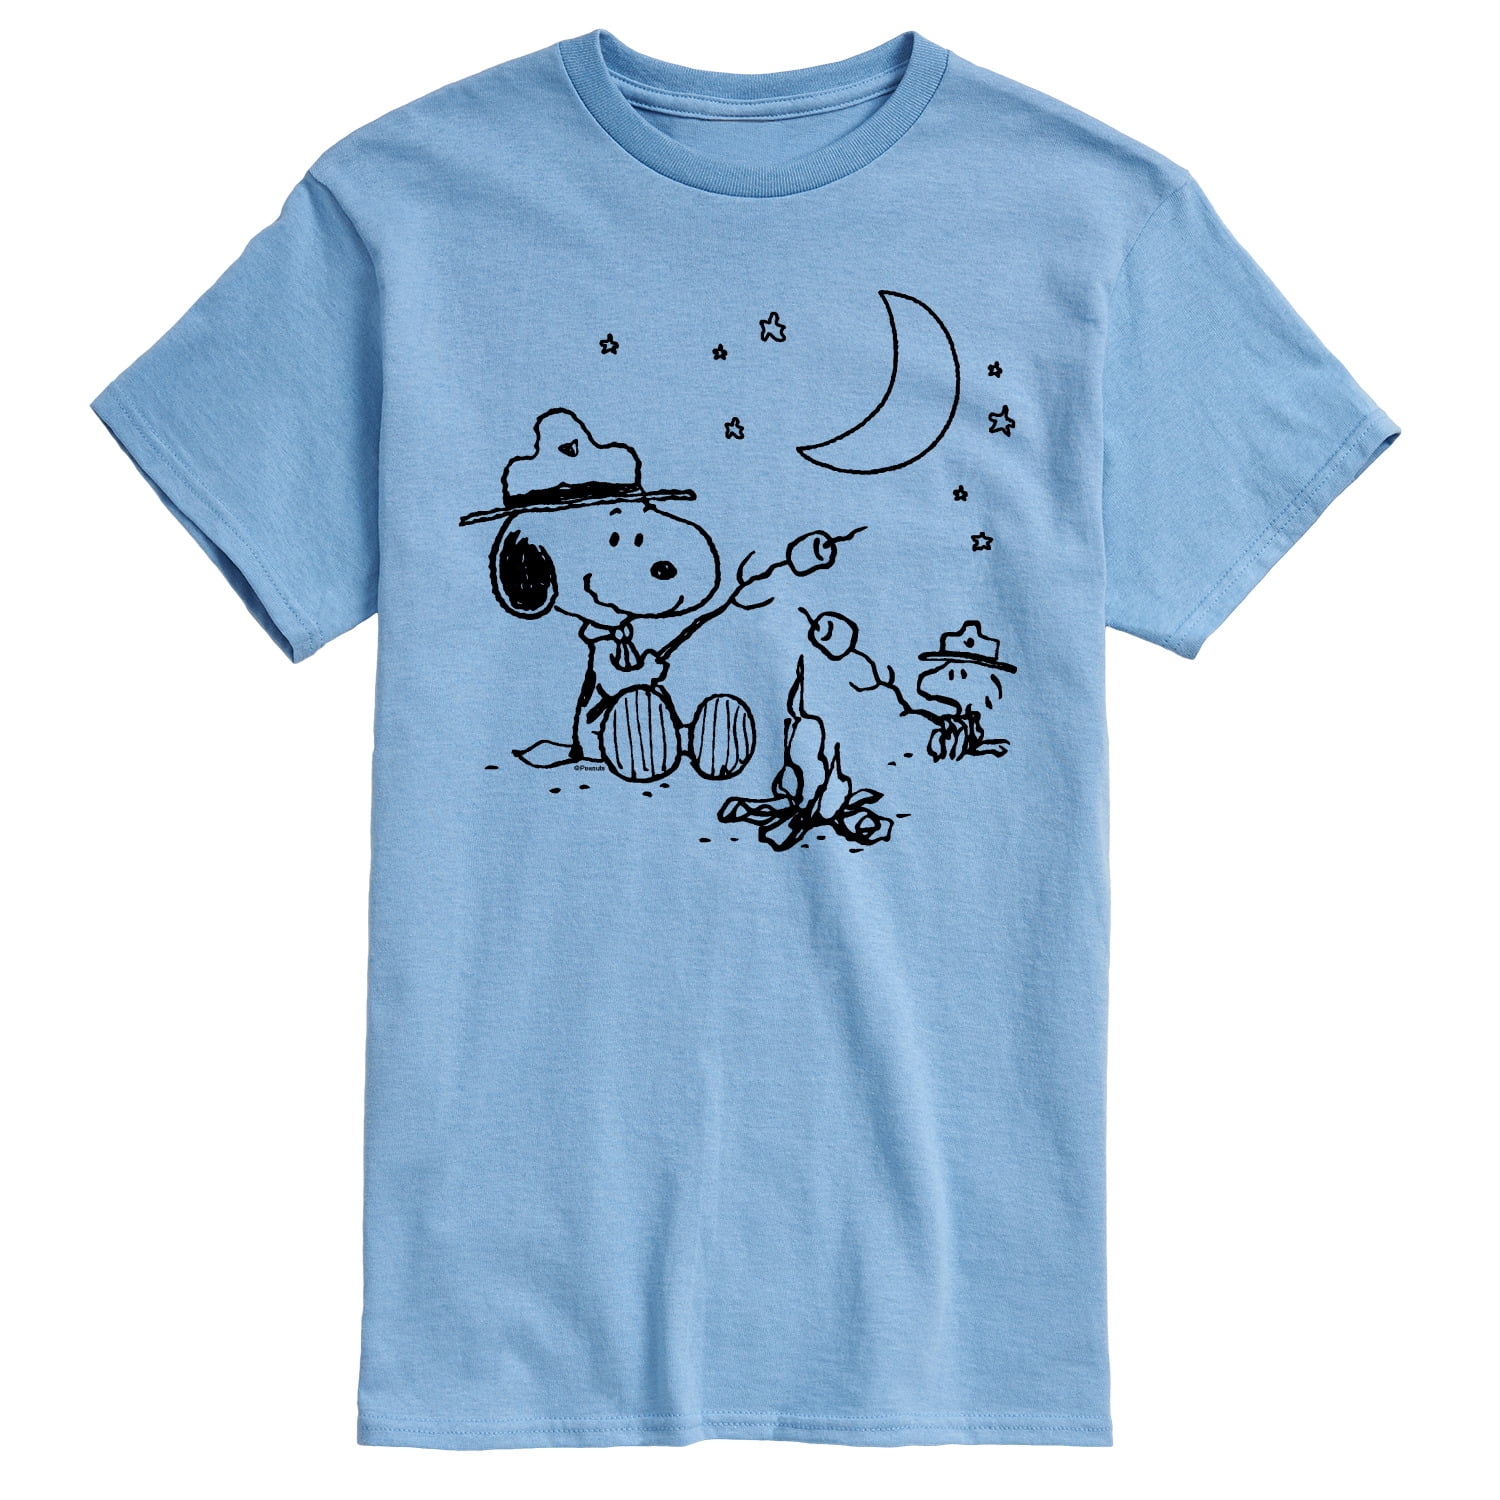 Peanuts - Snoopy Camping - Men's Short Sleeve Graphic T-Shirt